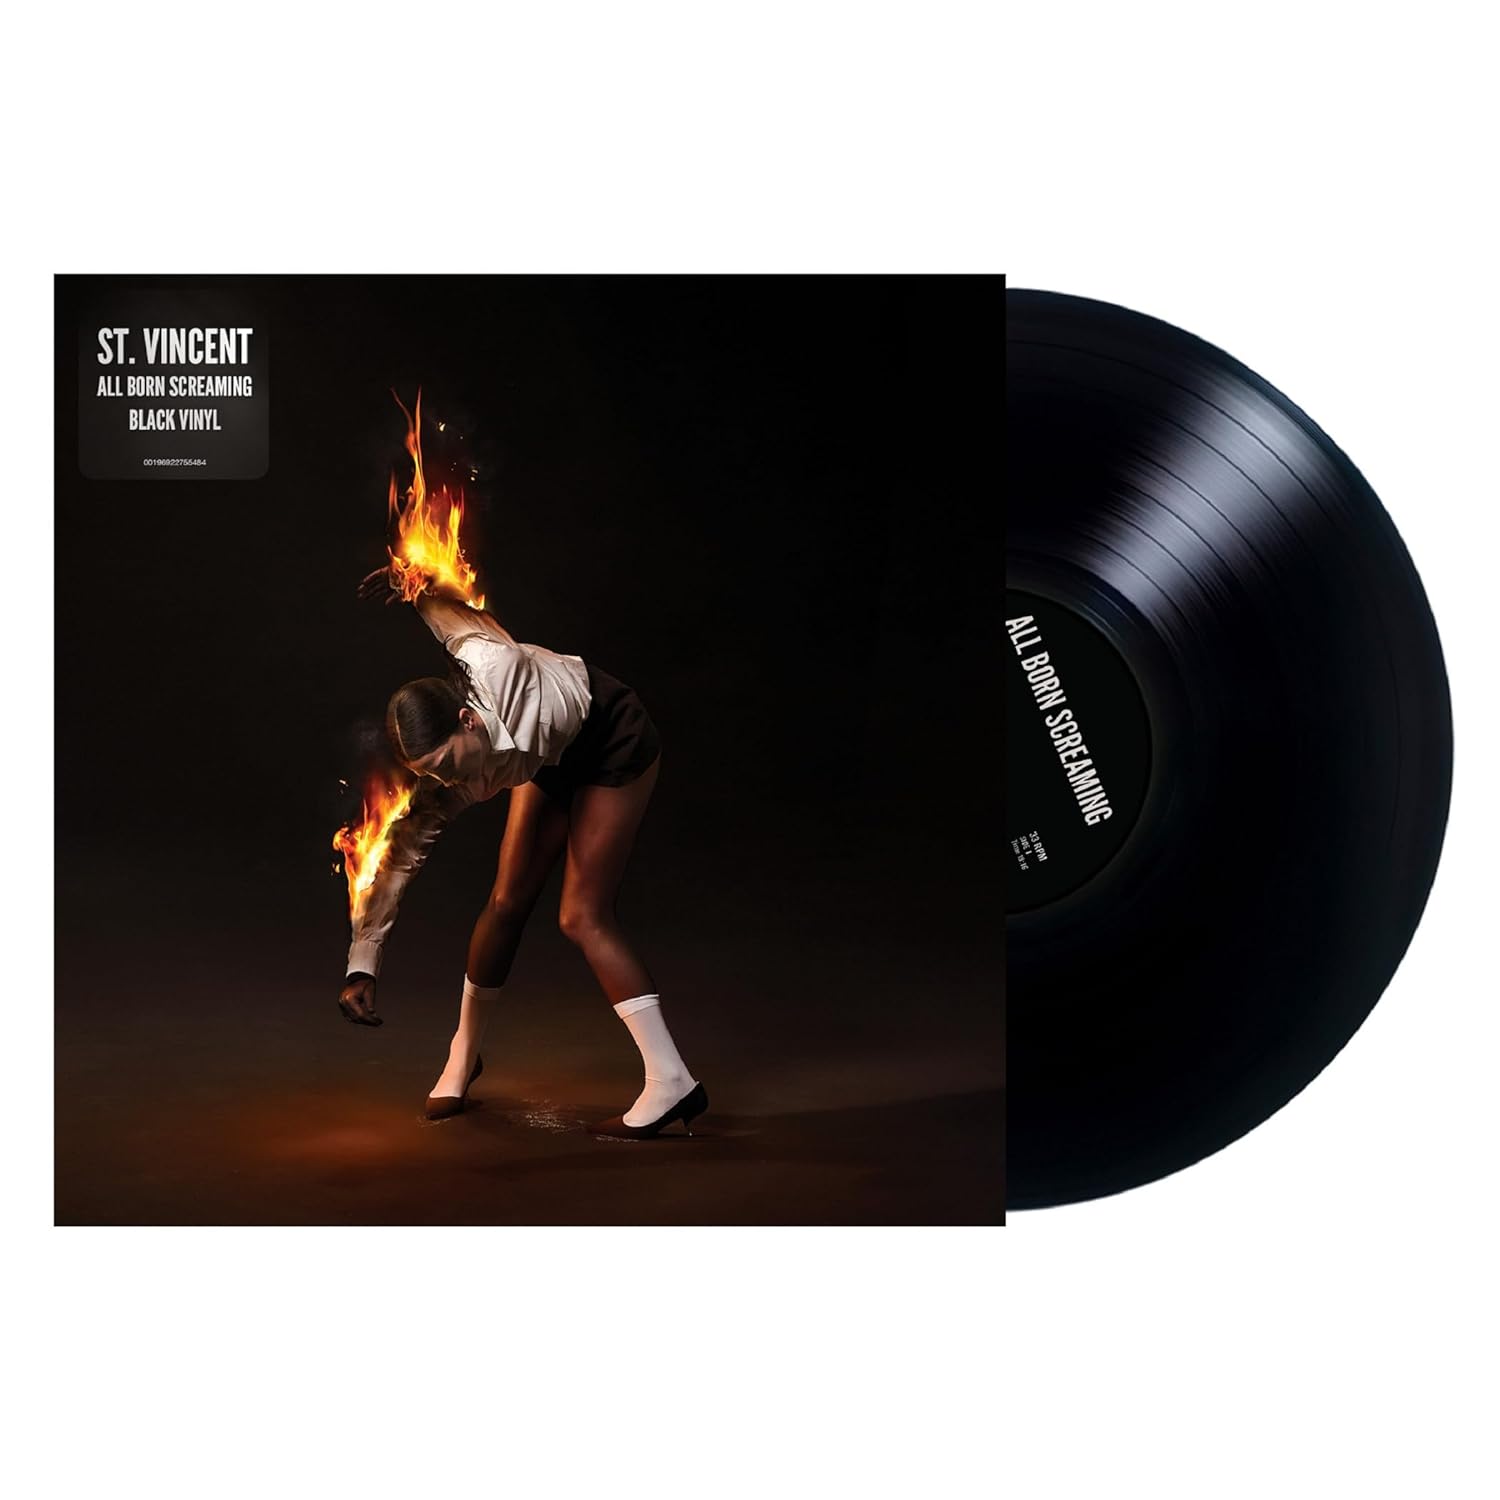 ST. VINCENT – ALL BORN SCREAMING LP